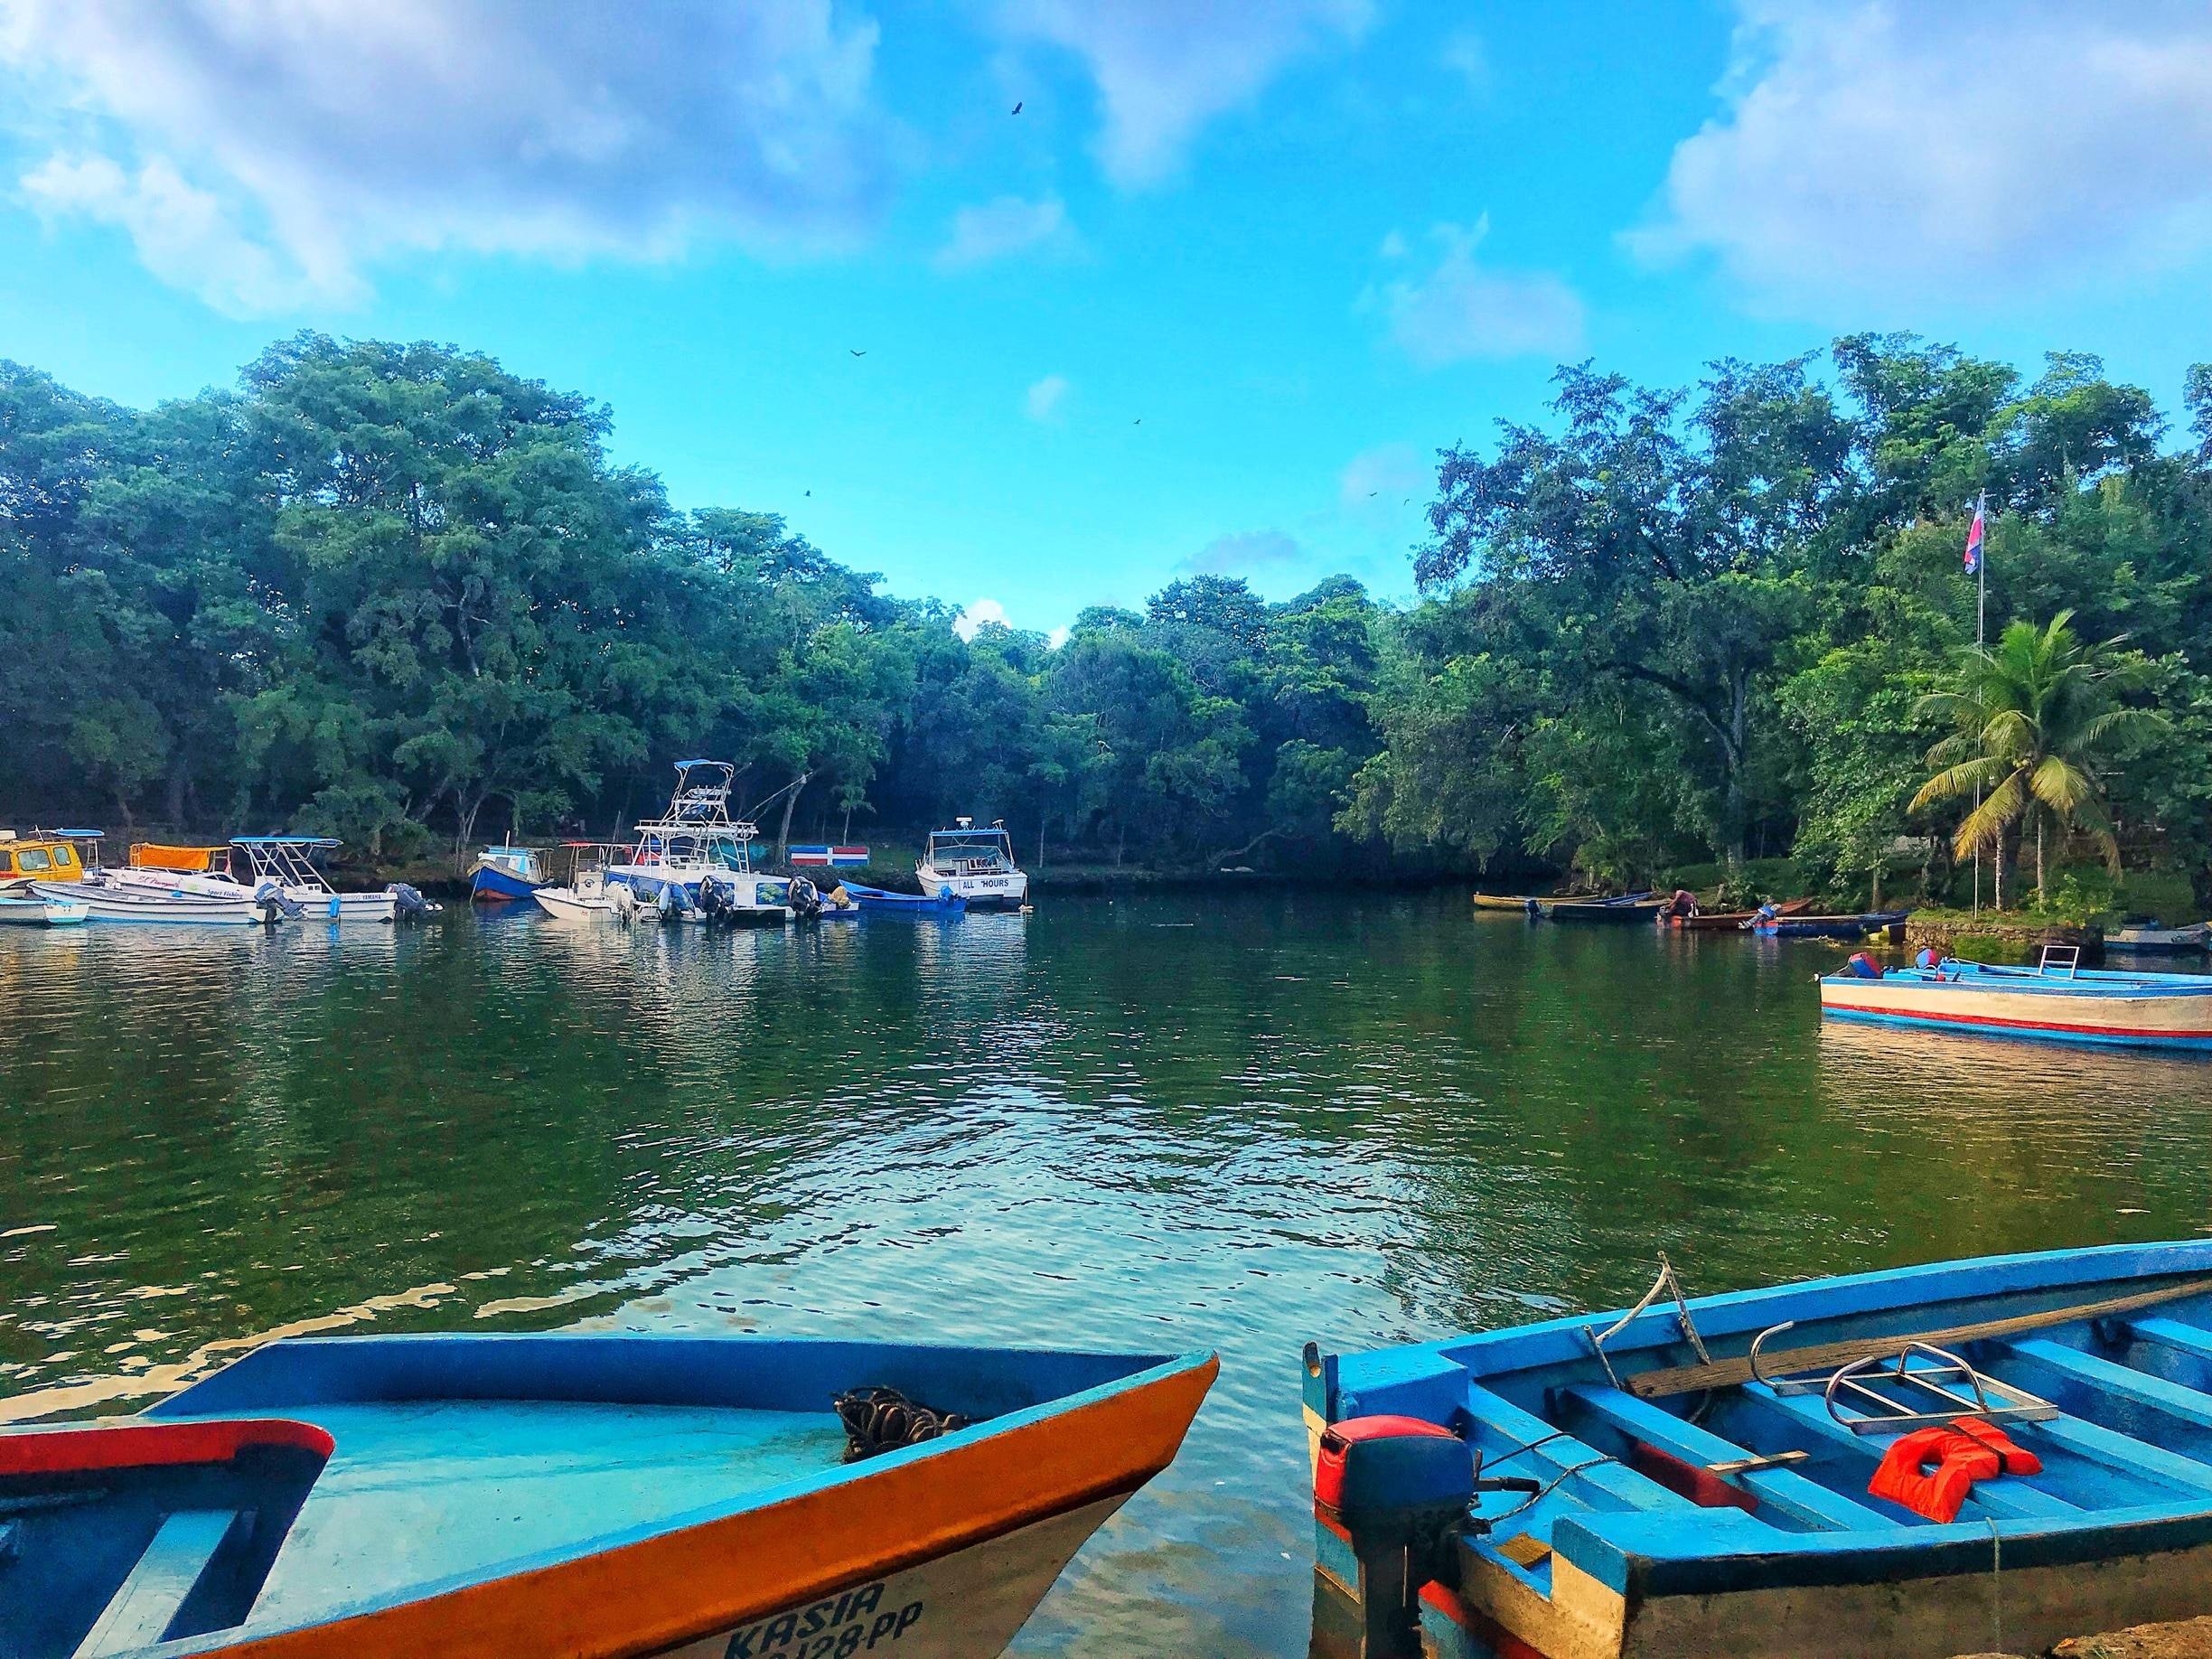 Laguna Gri-Gri, nature-lovers and tropical-bird-watchers’ paradise. 

It gets its name from the area’s abundant presence of the Gri-Gri tree. The dense mangrove forest that surrounds and separates it from Corpses and Los Minos beaches houses the Bird Sanctuary, where thousands of birds live.